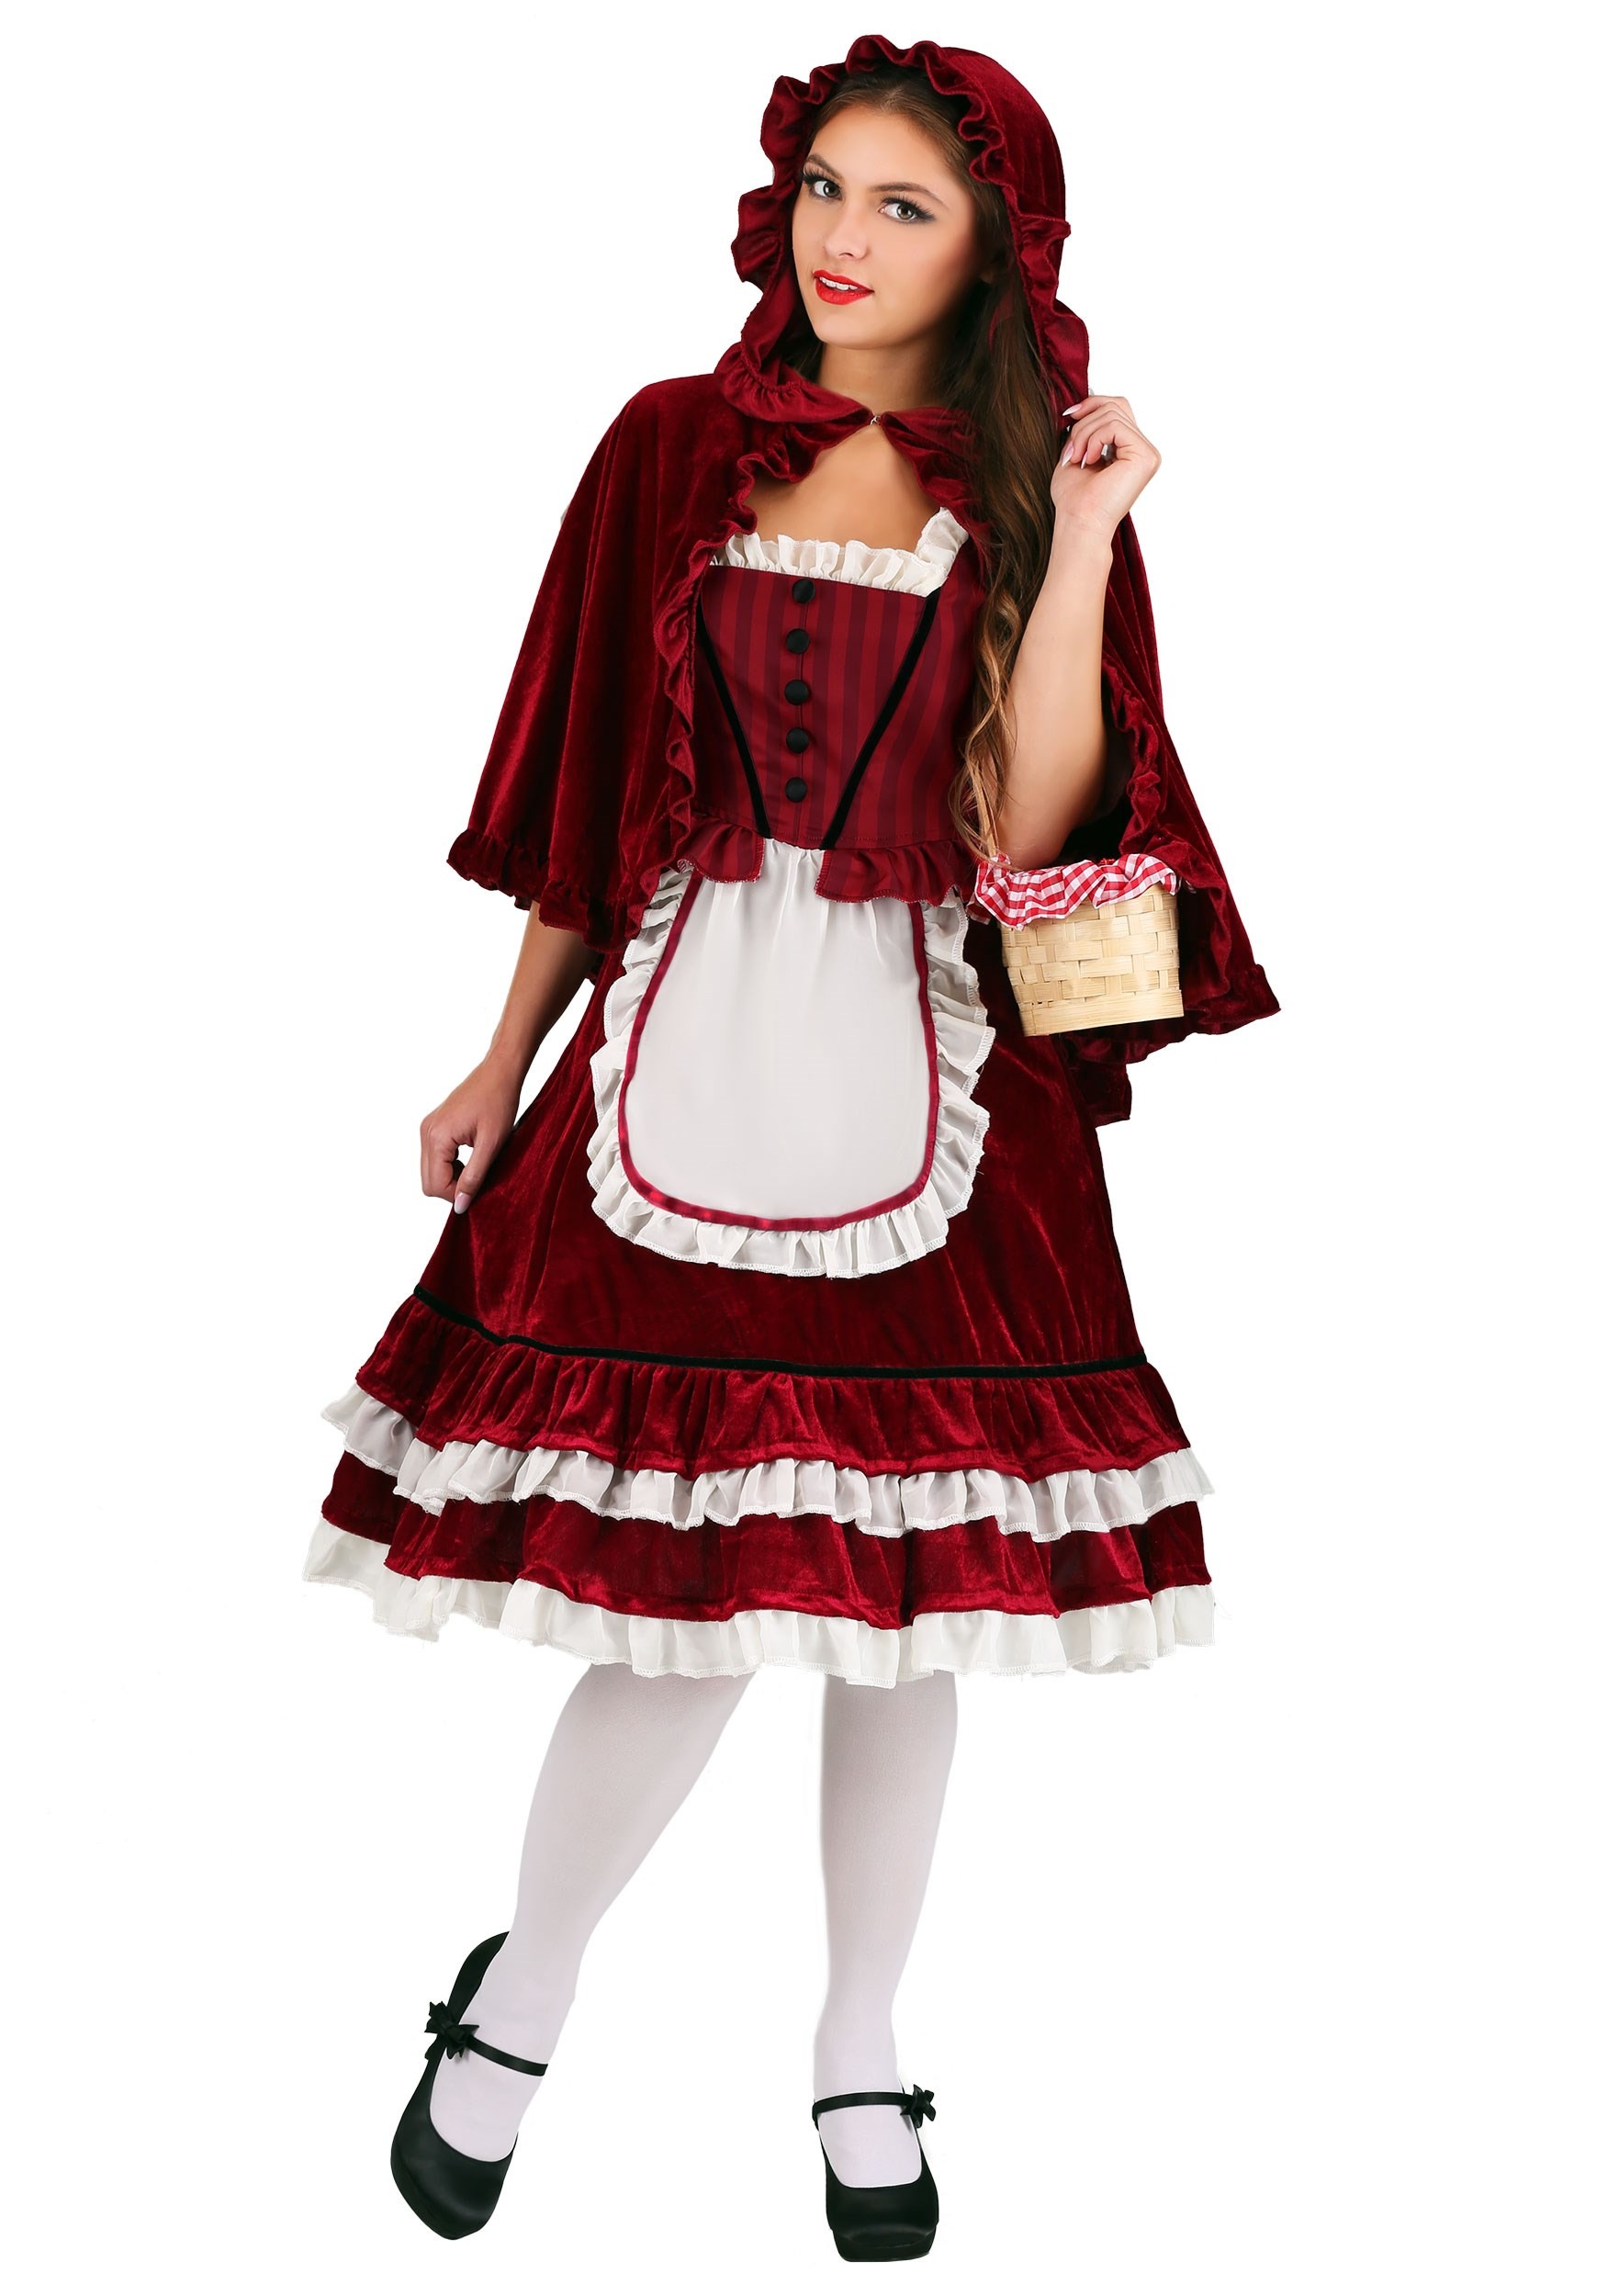 Classic Red Riding Hood Costume for Women